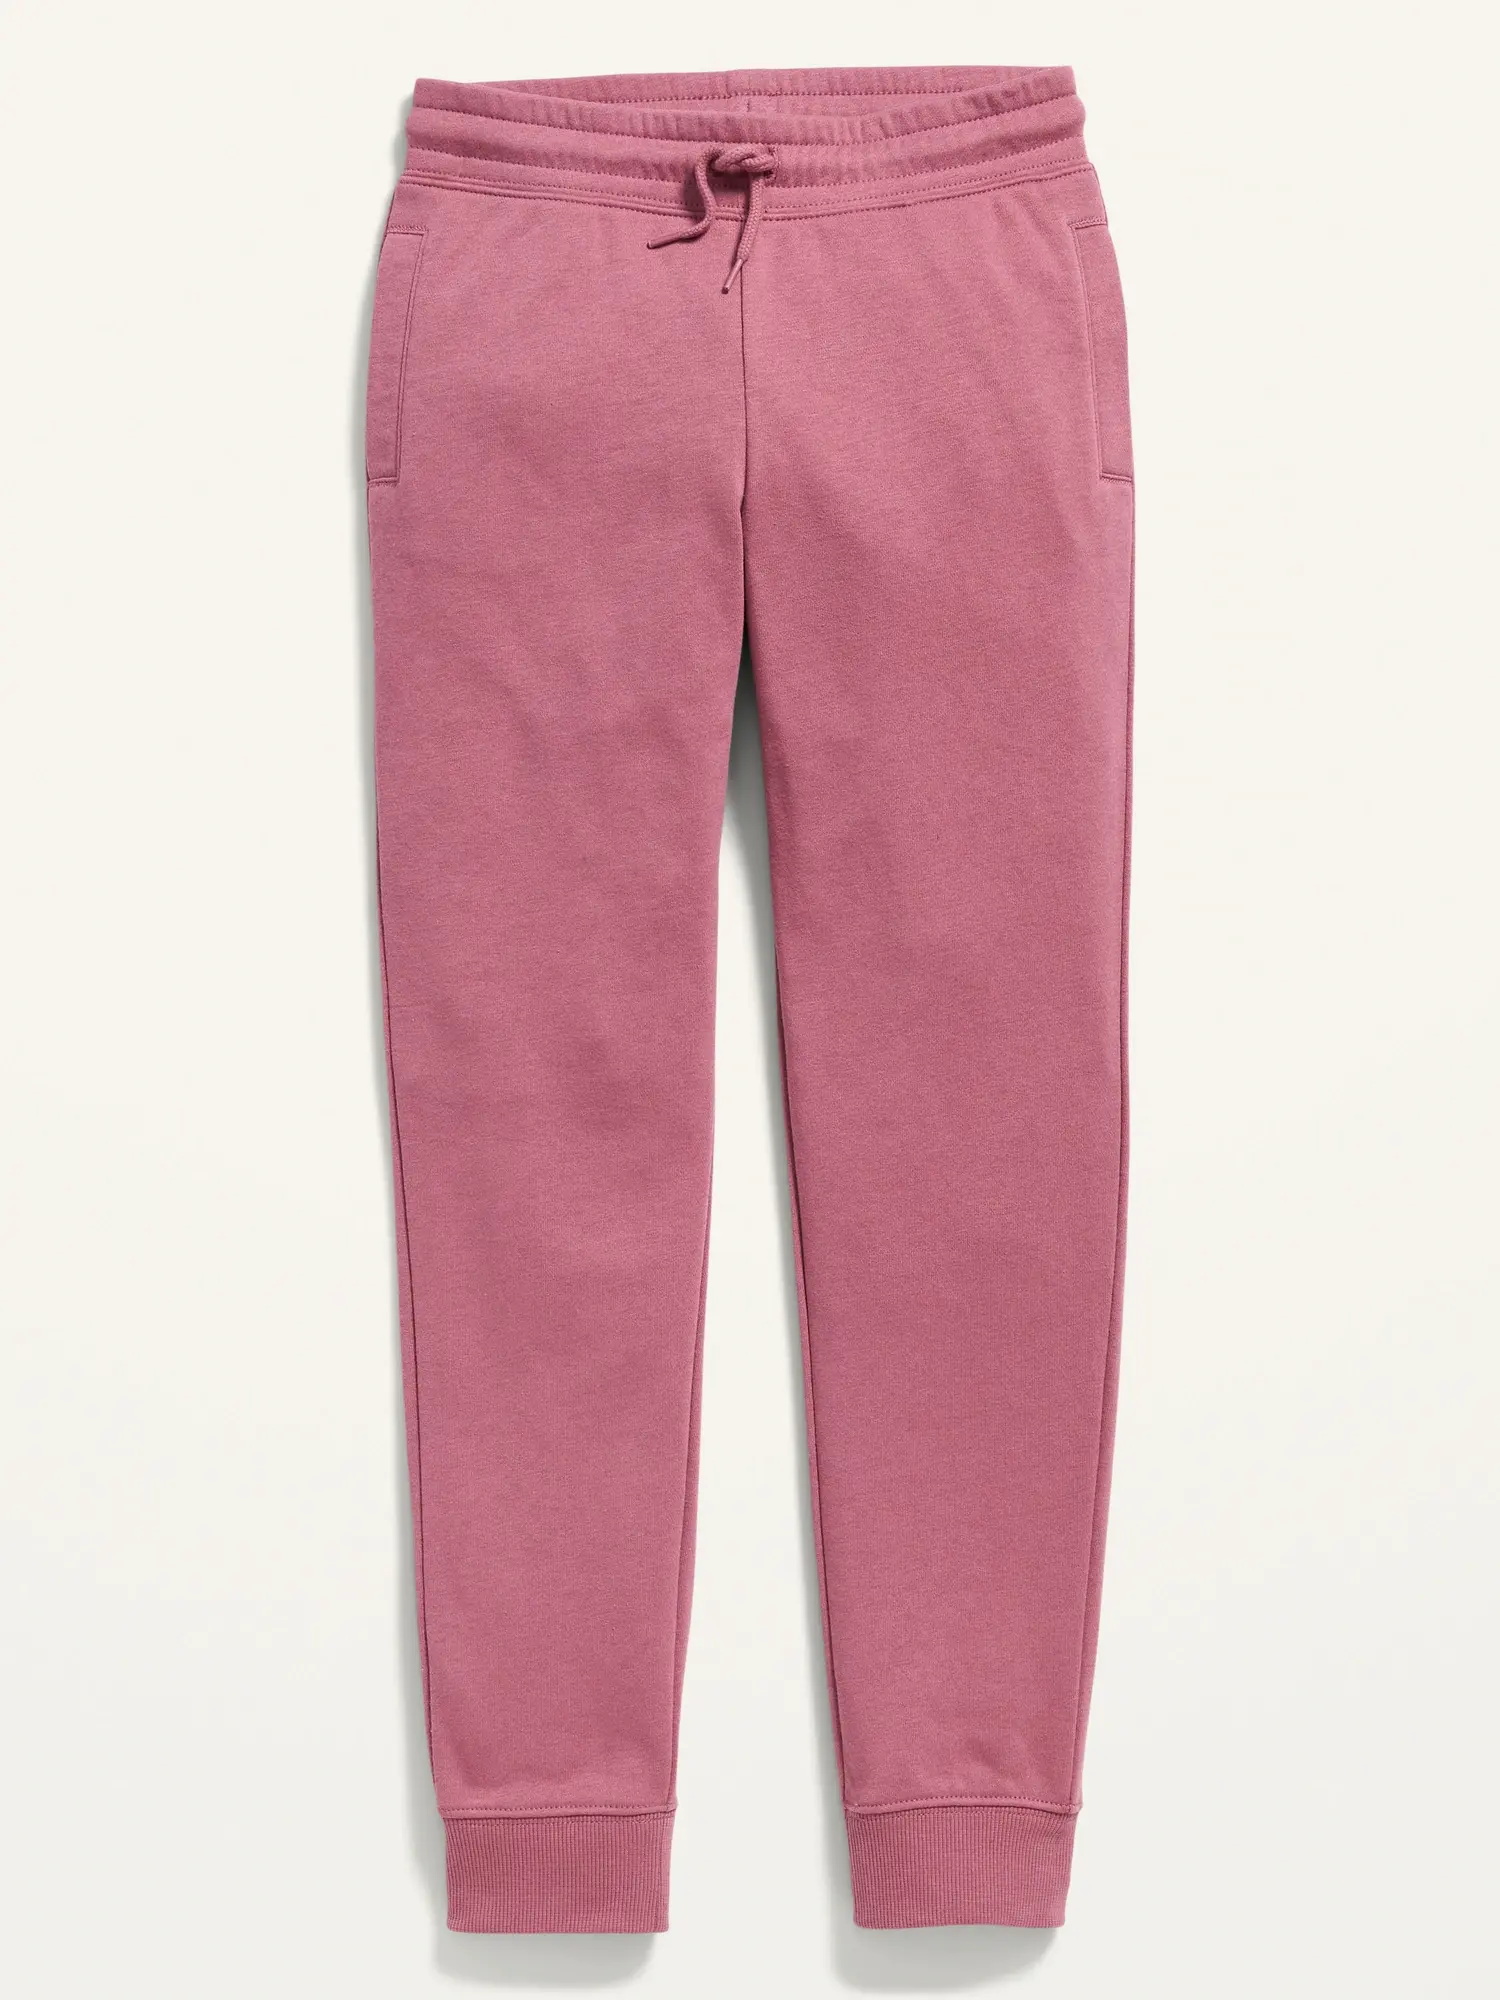 Old Navy High-Waisted French Terry Jogger Sweatpants for Girls pink. 1